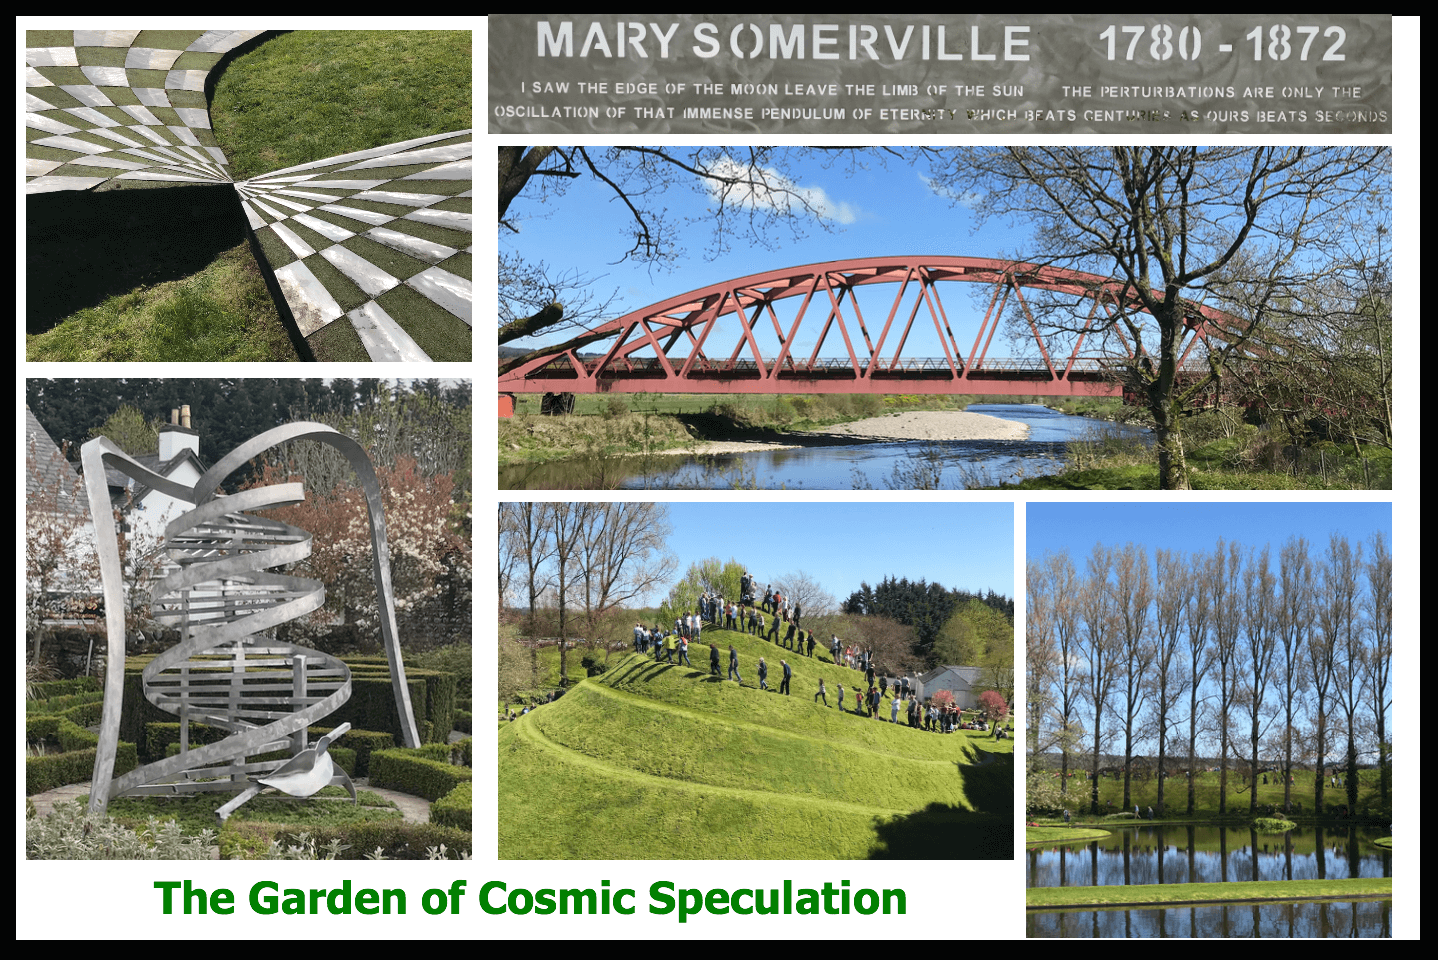 The Garden of Cosmic Speculation – 6 May 2018 Visit